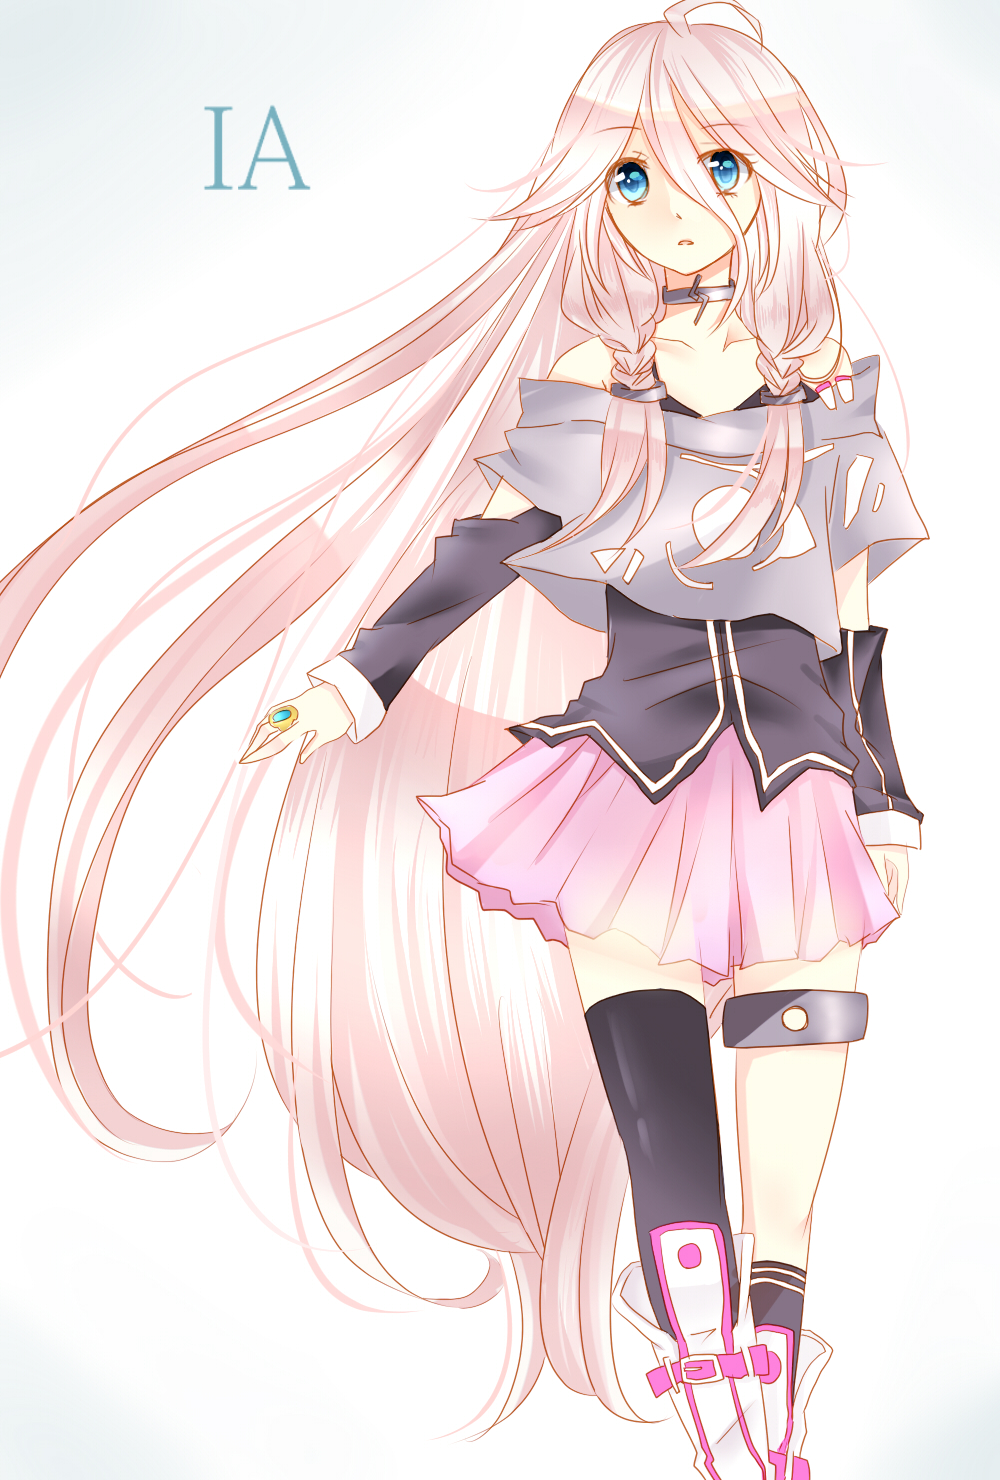 vocaloid ia quotes